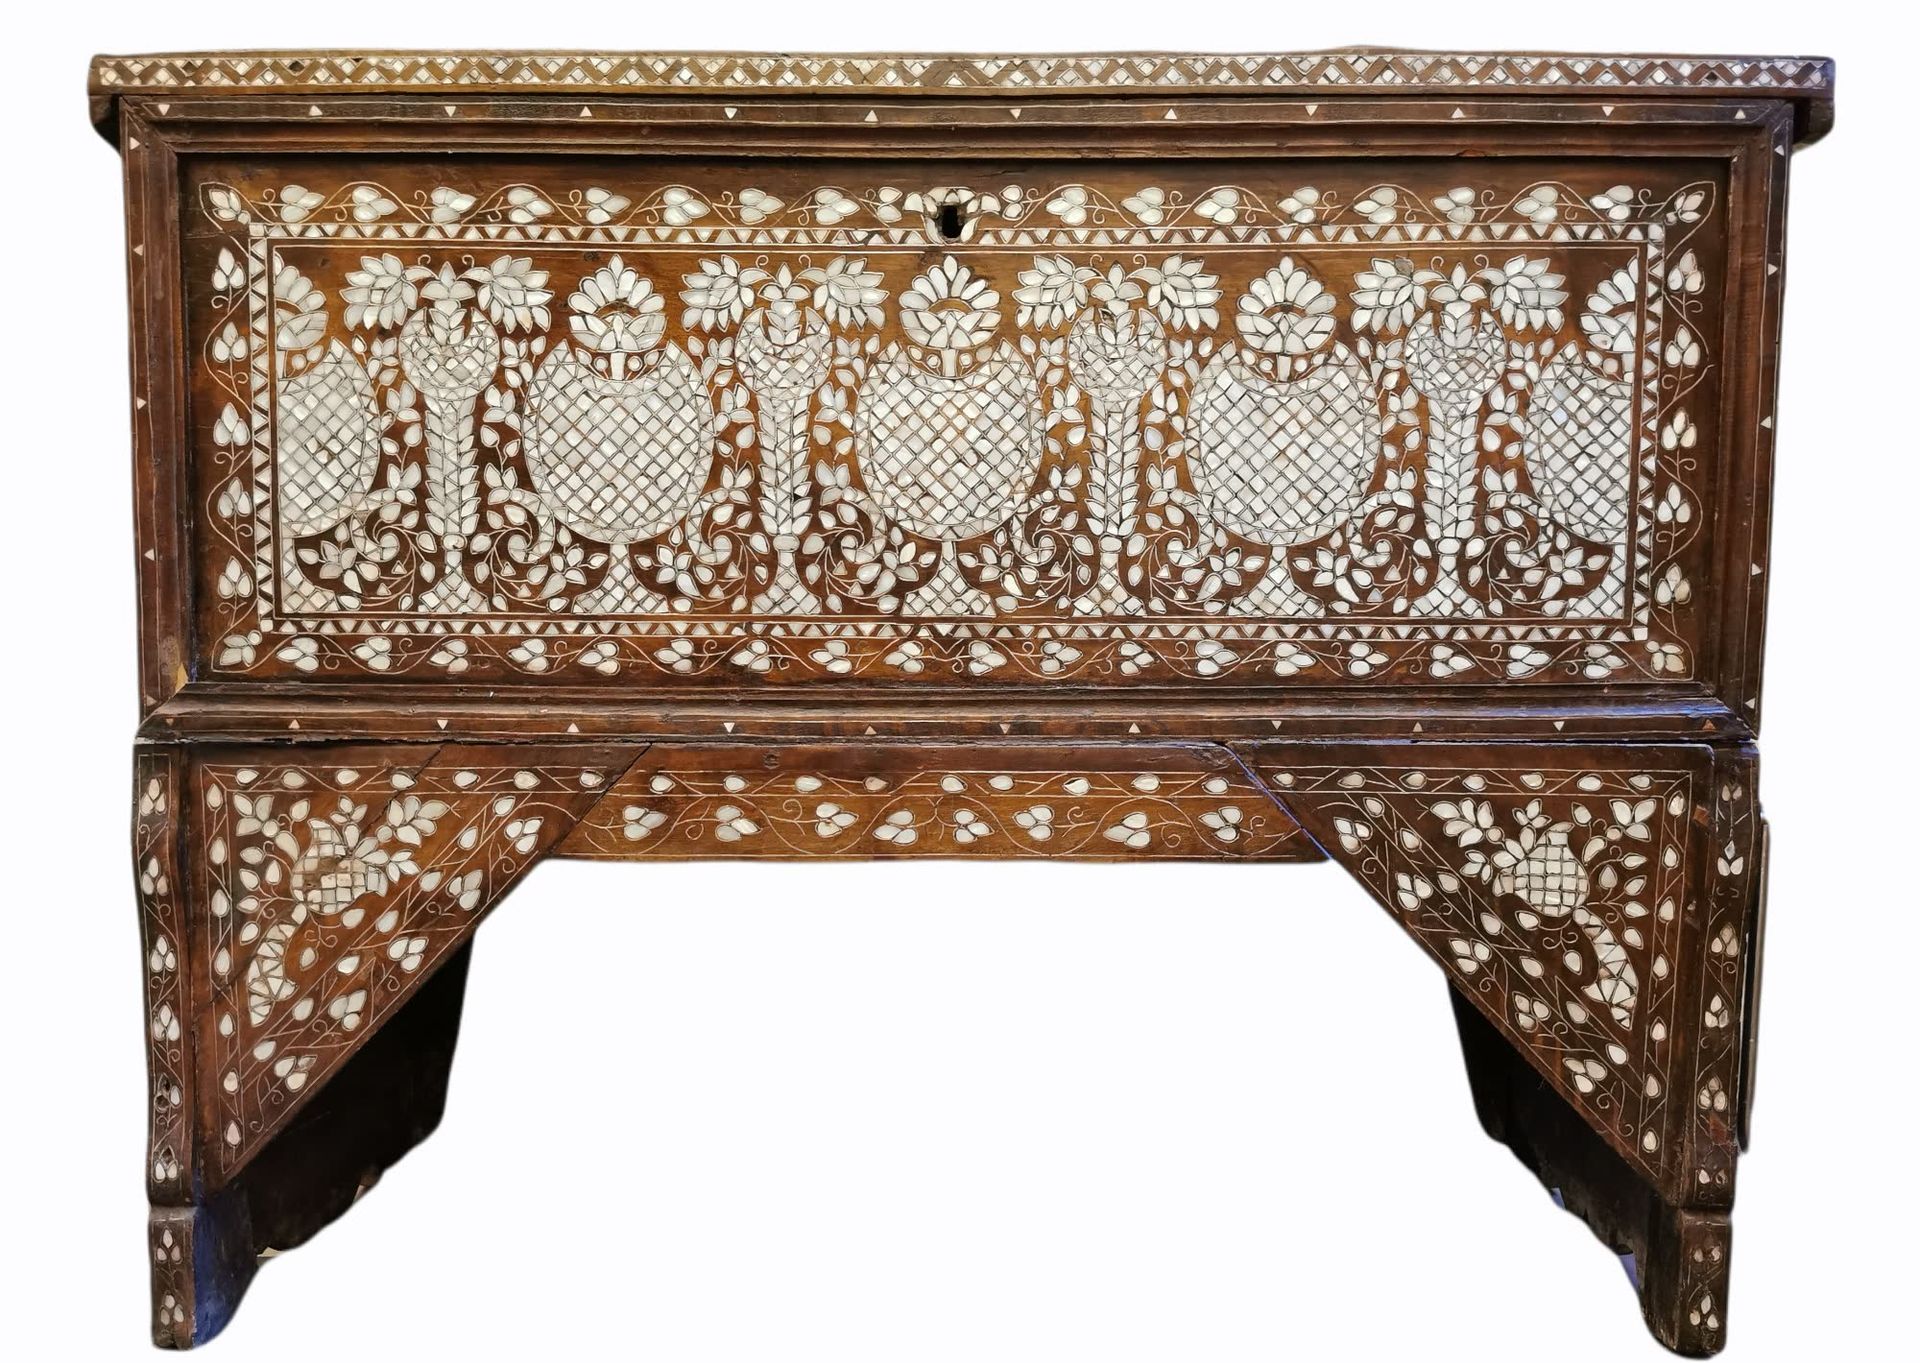 Null A syrian chest
With mother of pearl inlay.
103 x 135 x 52 cm.